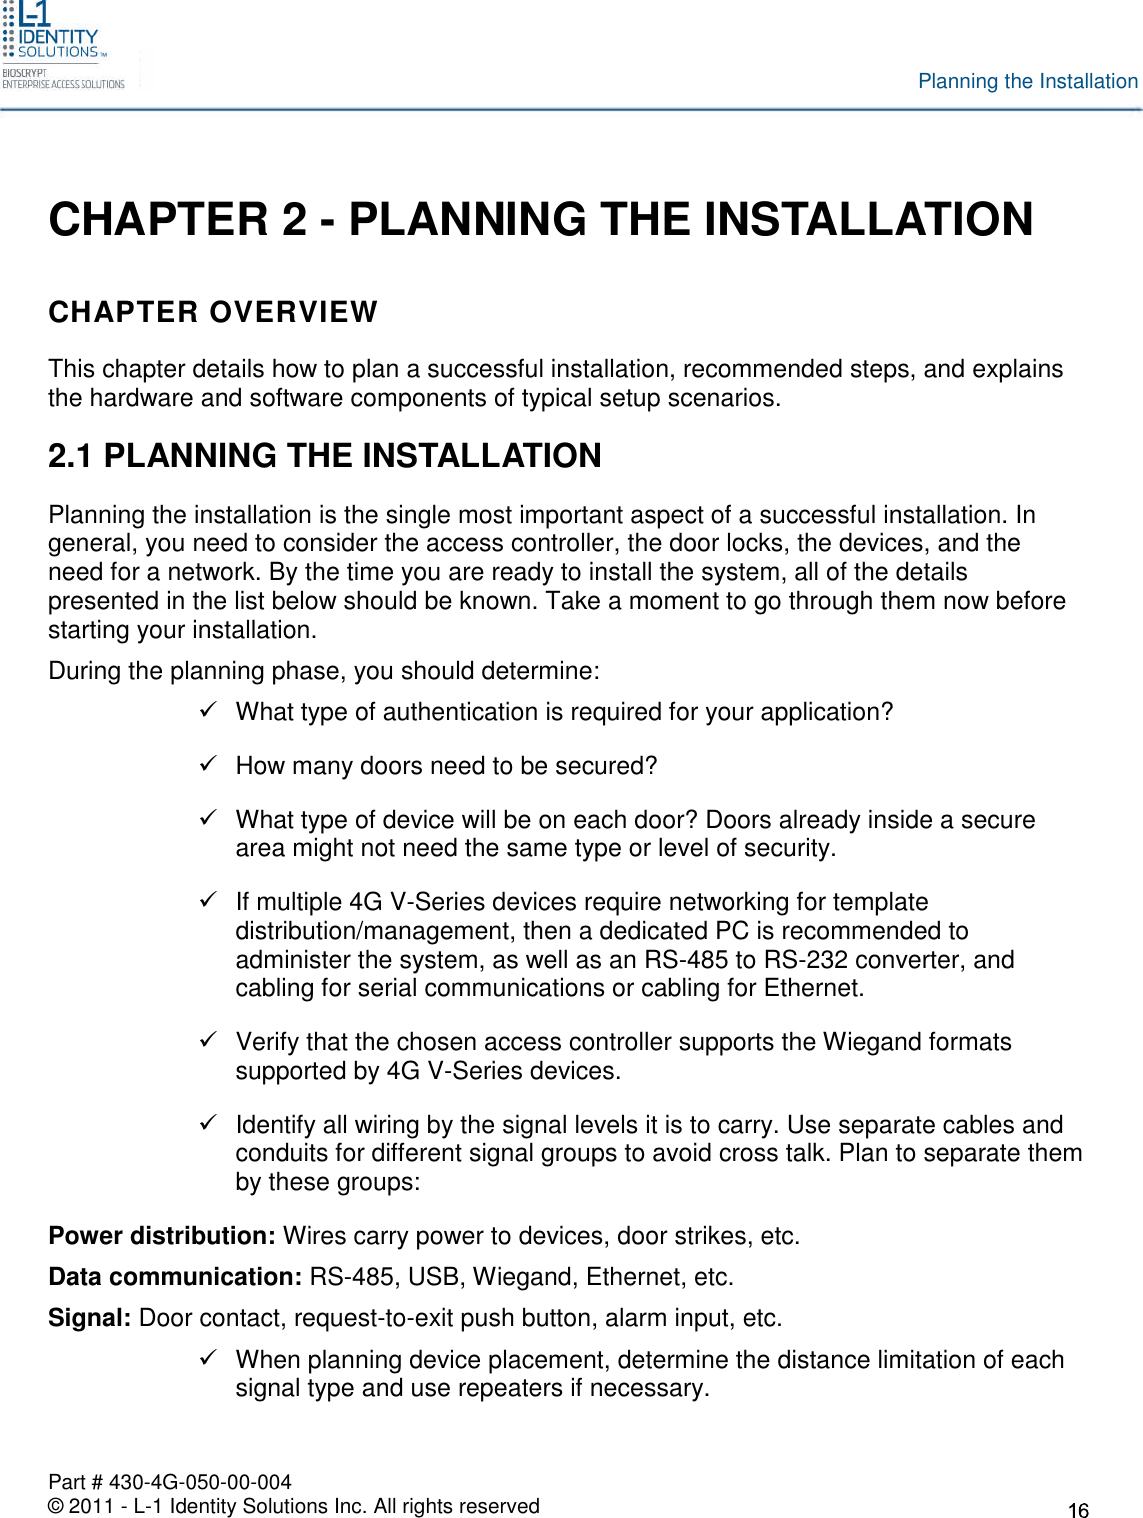 Part # 430-4G-050-00-004© 2011 - L-1 Identity Solutions Inc. All rights reservedPlanning the InstallationCHAPTER 2 - PLANNING THE INSTALLATIONCHAPTER OVERVIEWThis chapter details how to plan a successful installation, recommended steps, and explainsthe hardware and software components of typical setup scenarios.2.1 PLANNING THE INSTALLATIONPlanning the installation is the single most important aspect of a successful installation. Ingeneral, you need to consider the access controller, the door locks, the devices, and theneed for a network. By the time you are ready to install the system, all of the detailspresented in the list below should be known. Take a moment to go through them now beforestarting your installation.During the planning phase, you should determine:What type of authentication is required for your application?How many doors need to be secured?What type of device will be on each door? Doors already inside a securearea might not need the same type or level of security.If multiple 4G V-Series devices require networking for templatedistribution/management, then a dedicated PC is recommended toadminister the system, as well as an RS-485 to RS-232 converter, andcabling for serial communications or cabling for Ethernet.Verify that the chosen access controller supports the Wiegand formatssupported by 4G V-Series devices.Identify all wiring by the signal levels it is to carry. Use separate cables andconduits for different signal groups to avoid cross talk. Plan to separate themby these groups:Power distribution: Wires carry power to devices, door strikes, etc.Data communication: RS-485, USB, Wiegand, Ethernet, etc.Signal: Door contact, request-to-exit push button, alarm input, etc.When planning device placement, determine the distance limitation of eachsignal type and use repeaters if necessary.